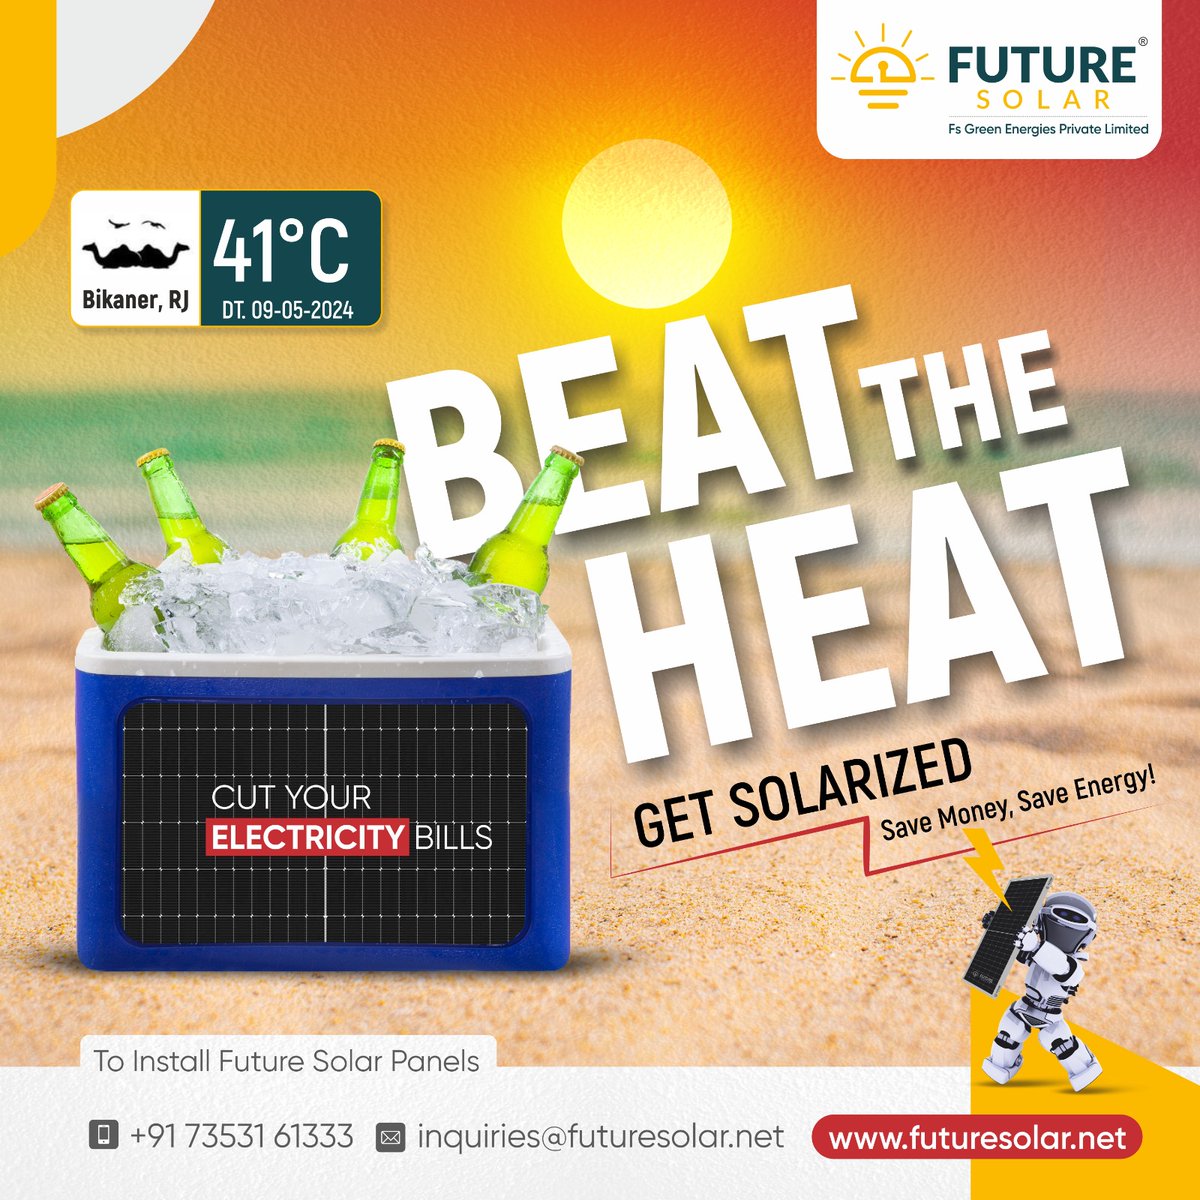 #BeatTheHeat with Coolers and Bikaneri Bhujia with your family. Install FUTURE SOLAR panels and stay cool amidst the rising heat with NO TENSION of rising electricity bills.
Install our powerhouse and enjoy the IPL.
#Bikaner #PVmodules #Technologies #sustainability #Renewable